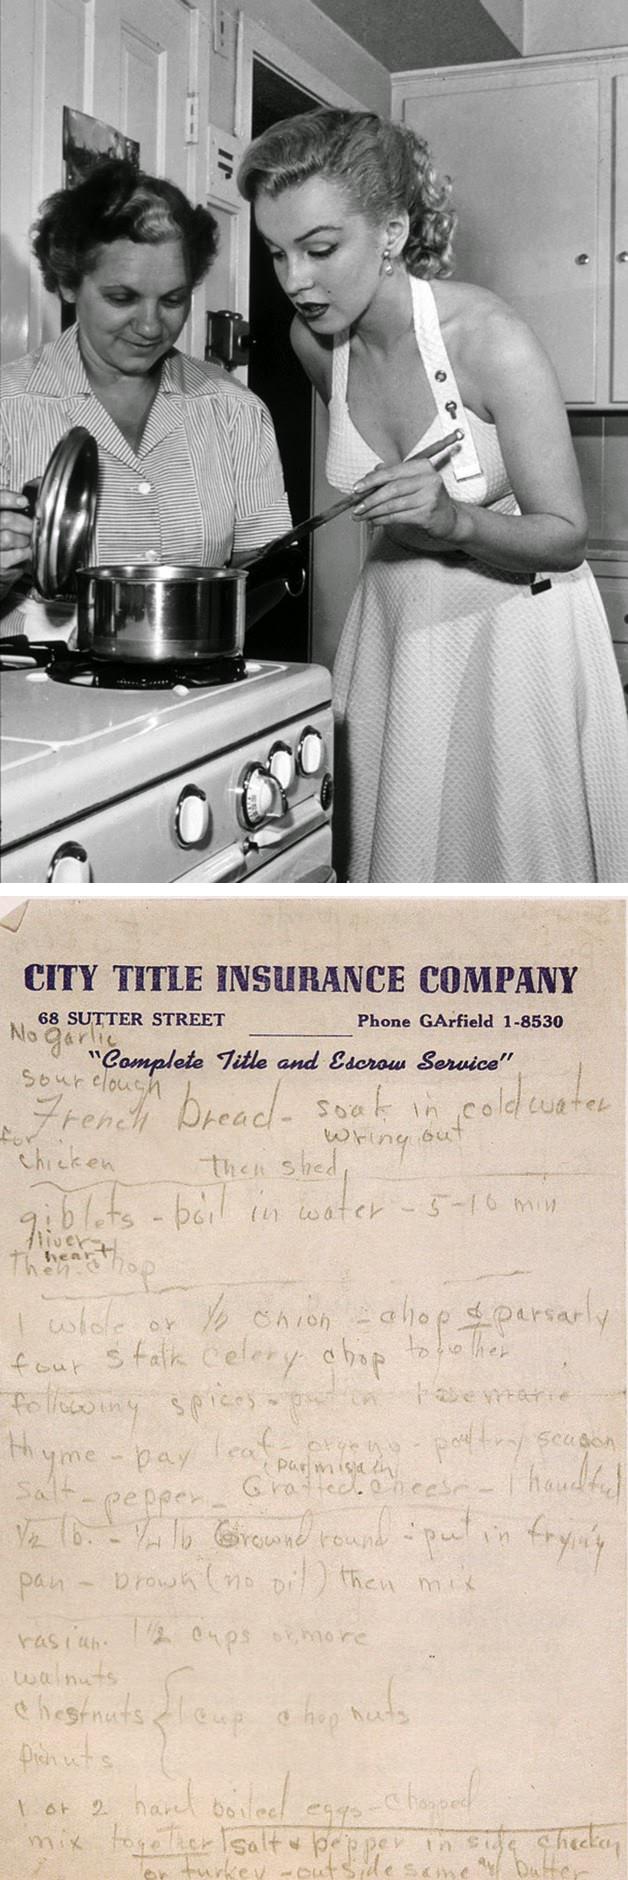 Marilyn Monroe’s Handwritten Turkey-and-Stuffing Recipe From the 1950s